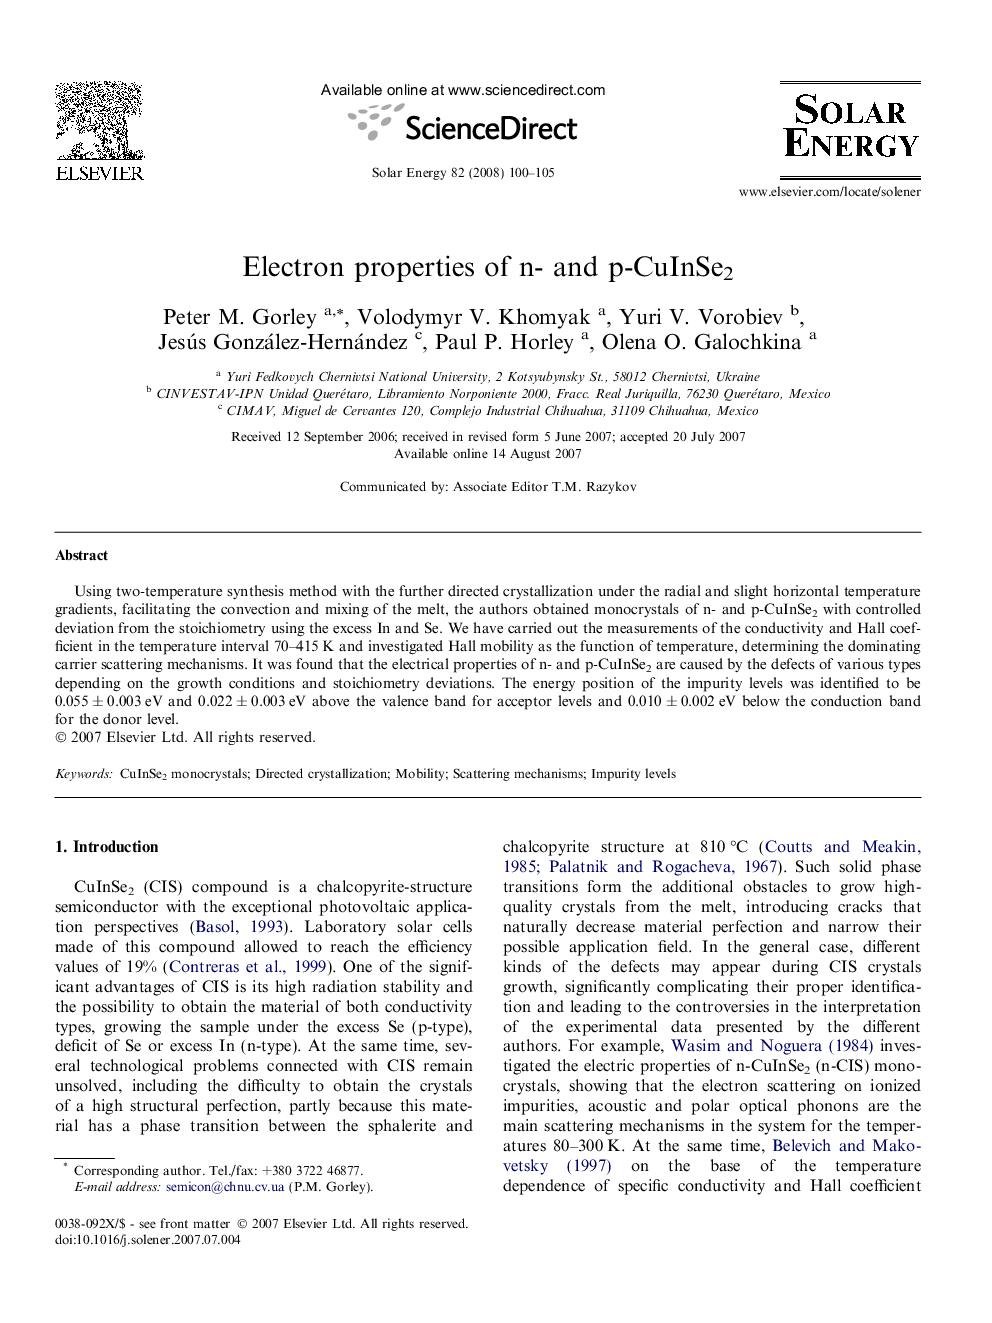 Electron properties of n- and p-CuInSe2